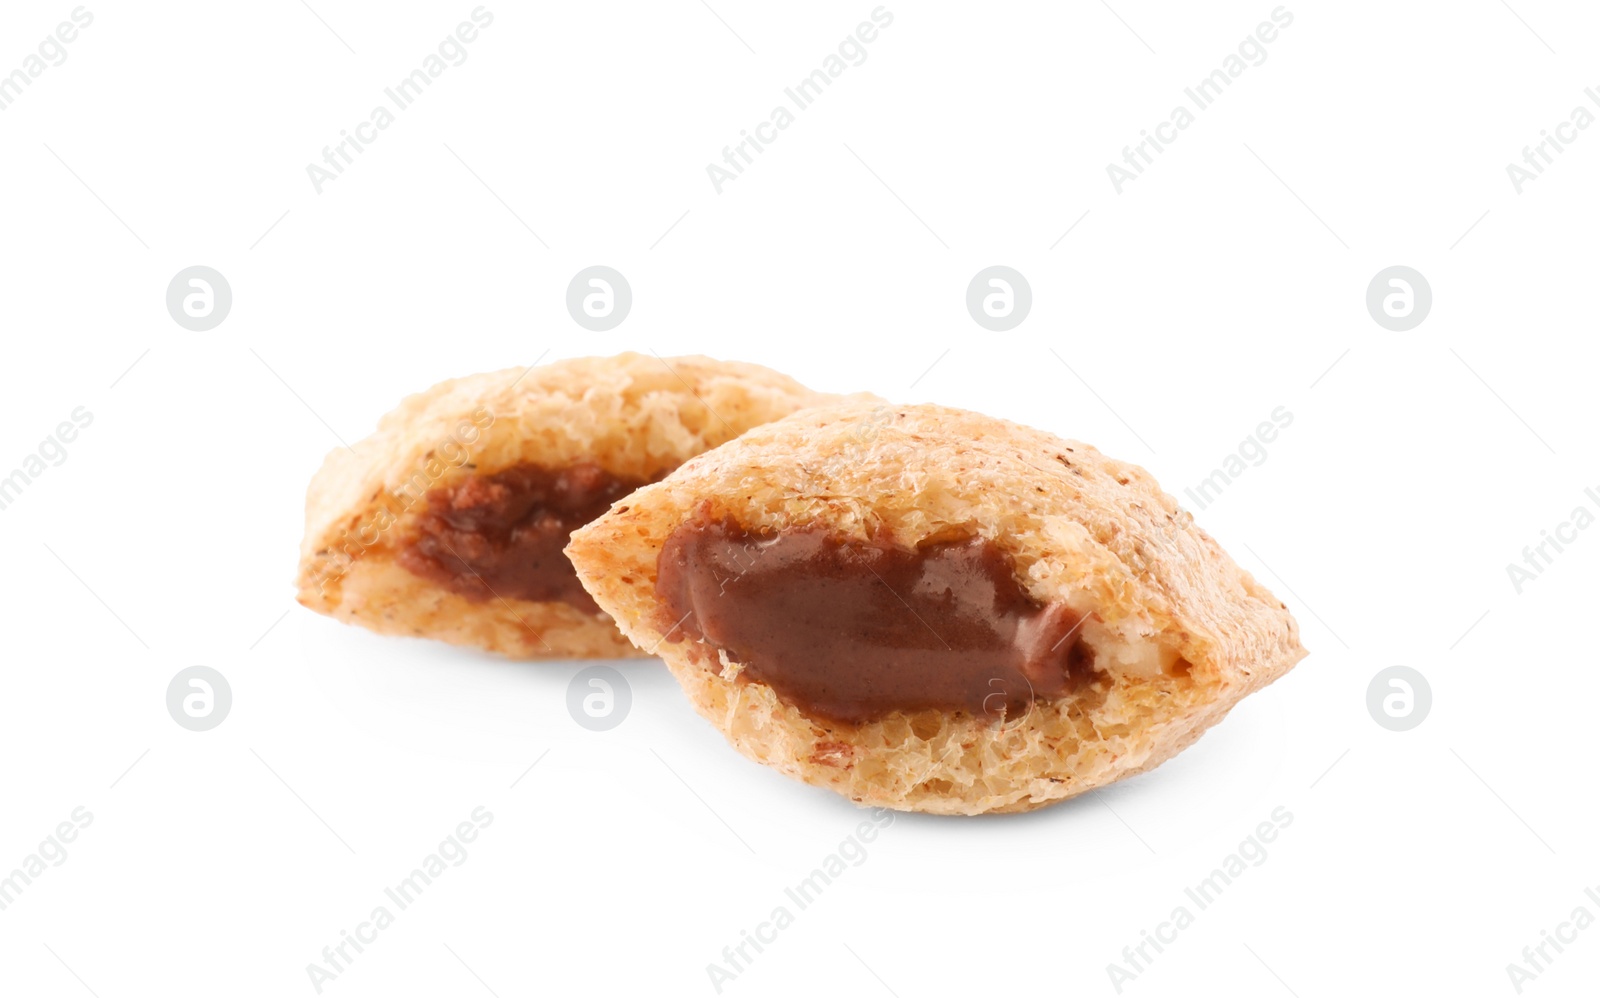 Photo of Broken corn pad with chocolate filling on white background